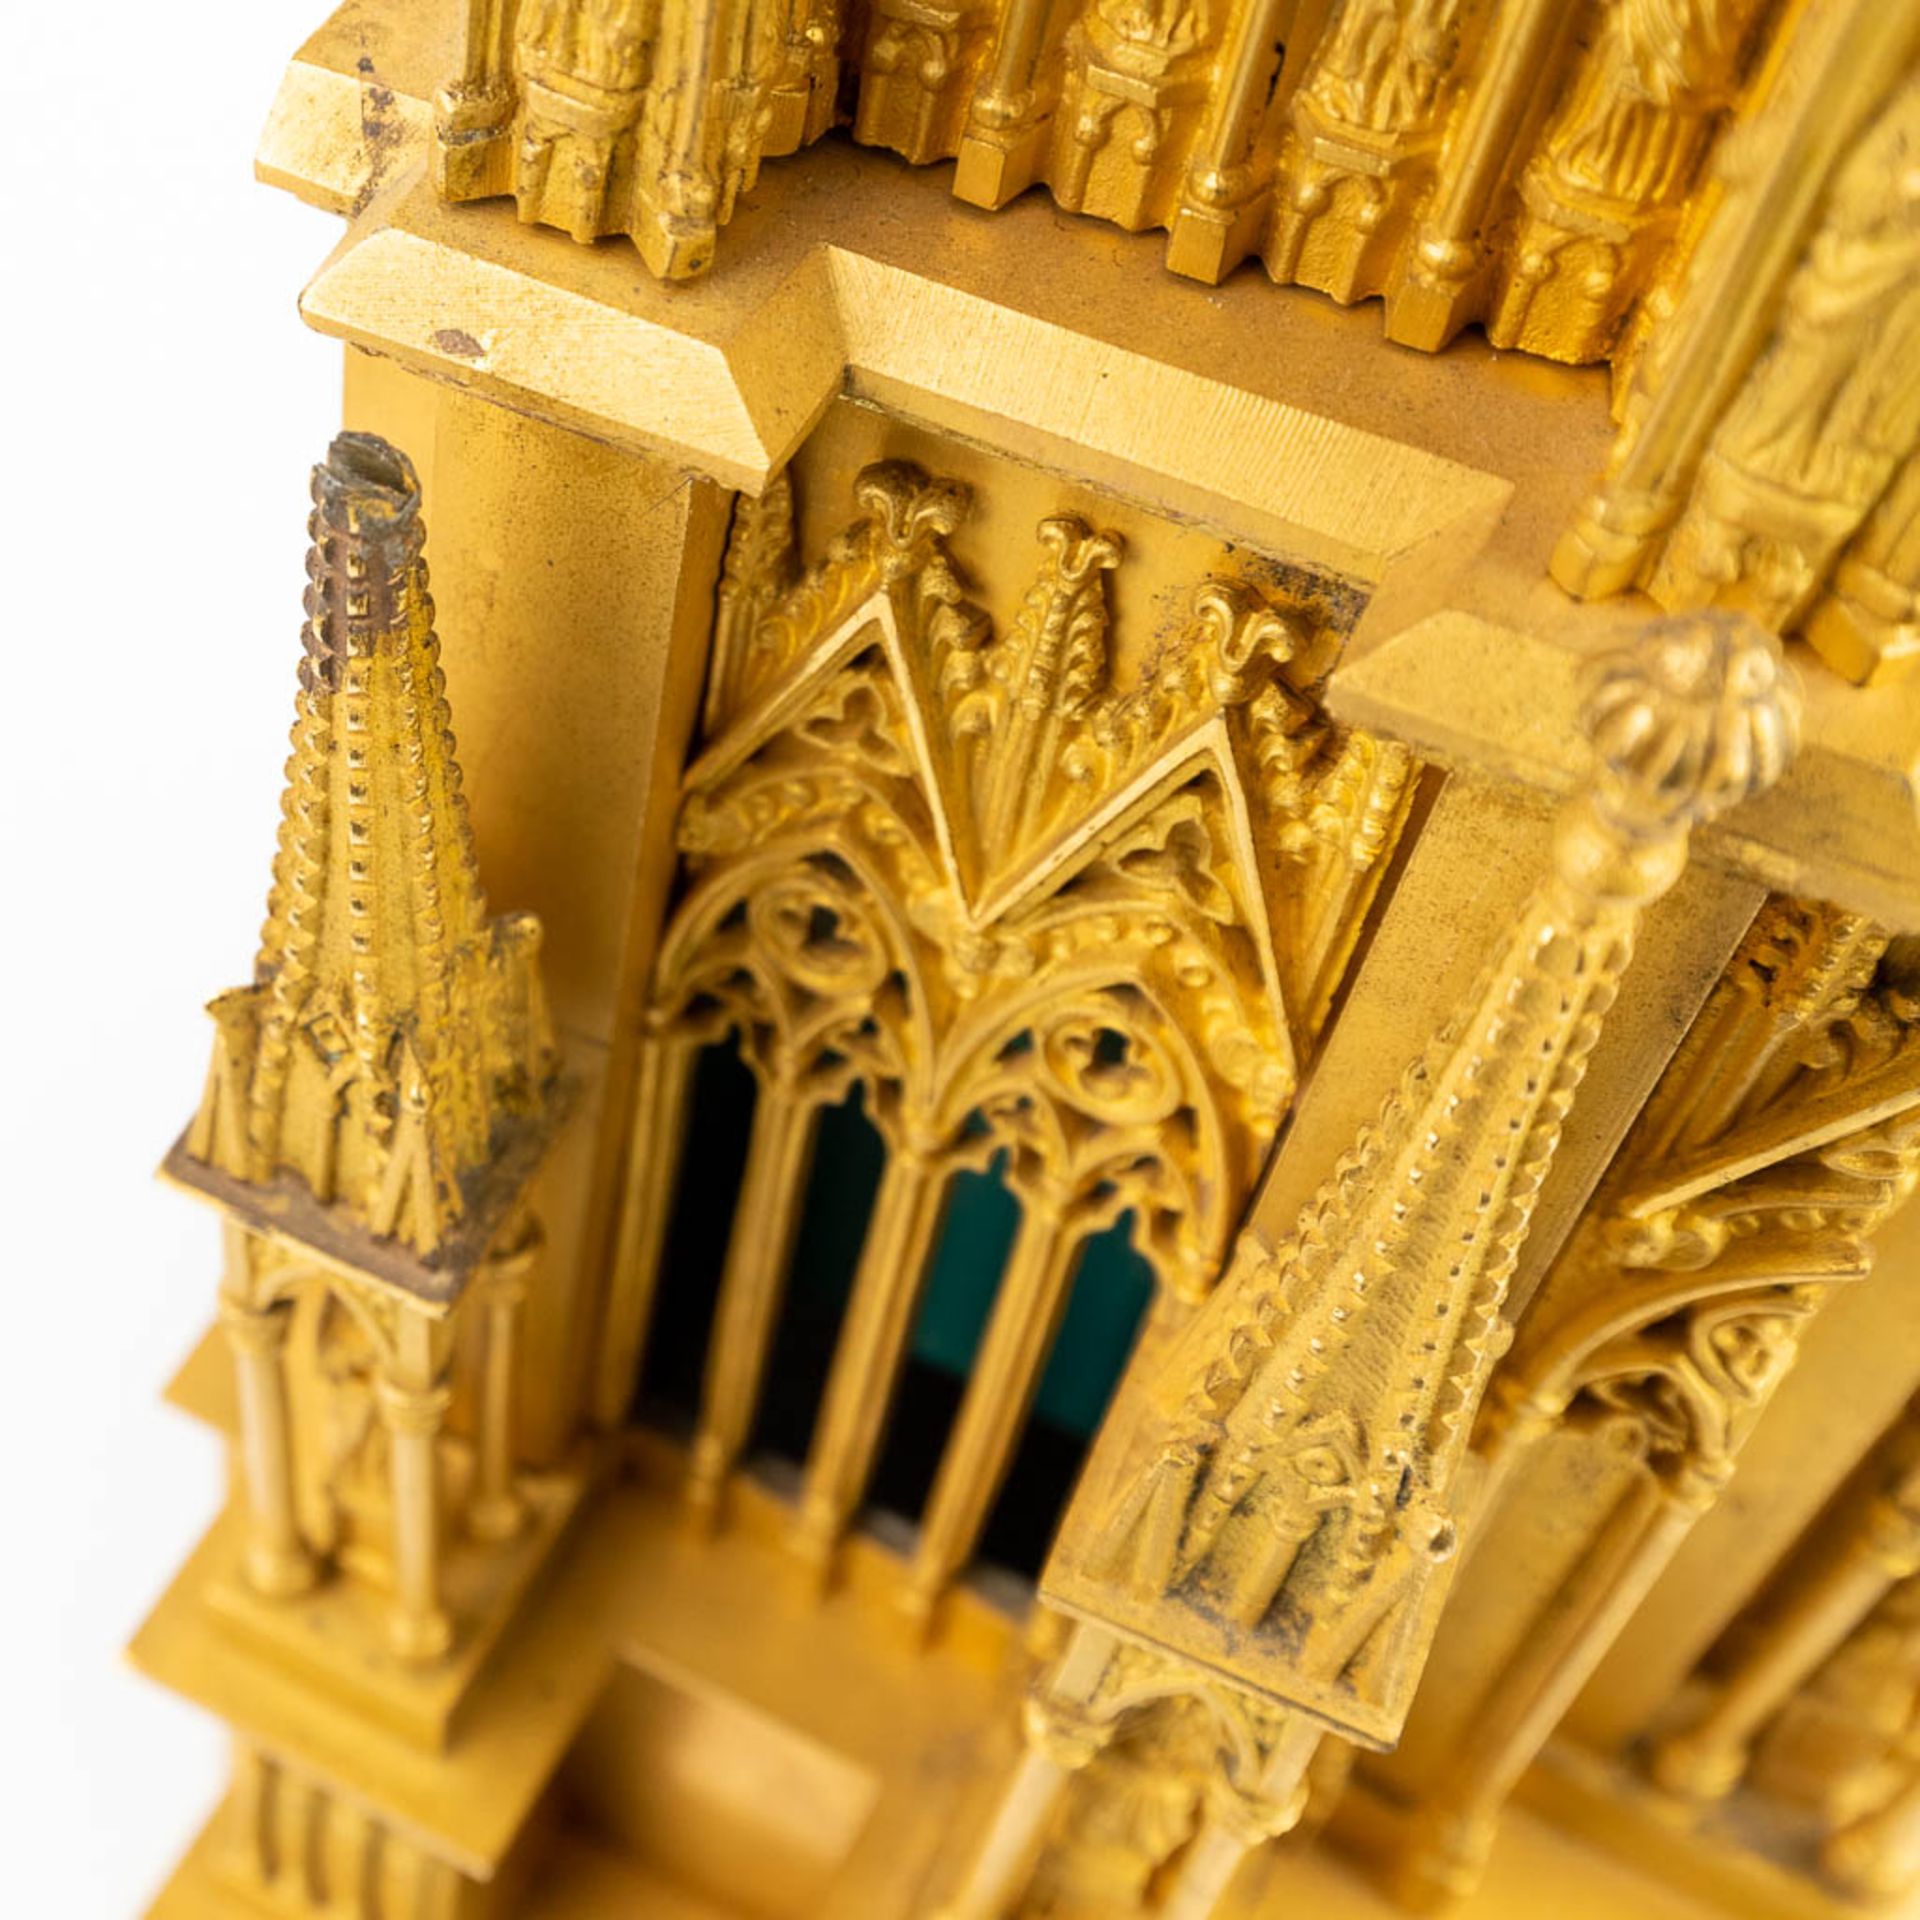 Cathedrale de Reims, an exceptional mantle clock made of gilt bronze. (15 x 31 x 47cm) - Image 10 of 16